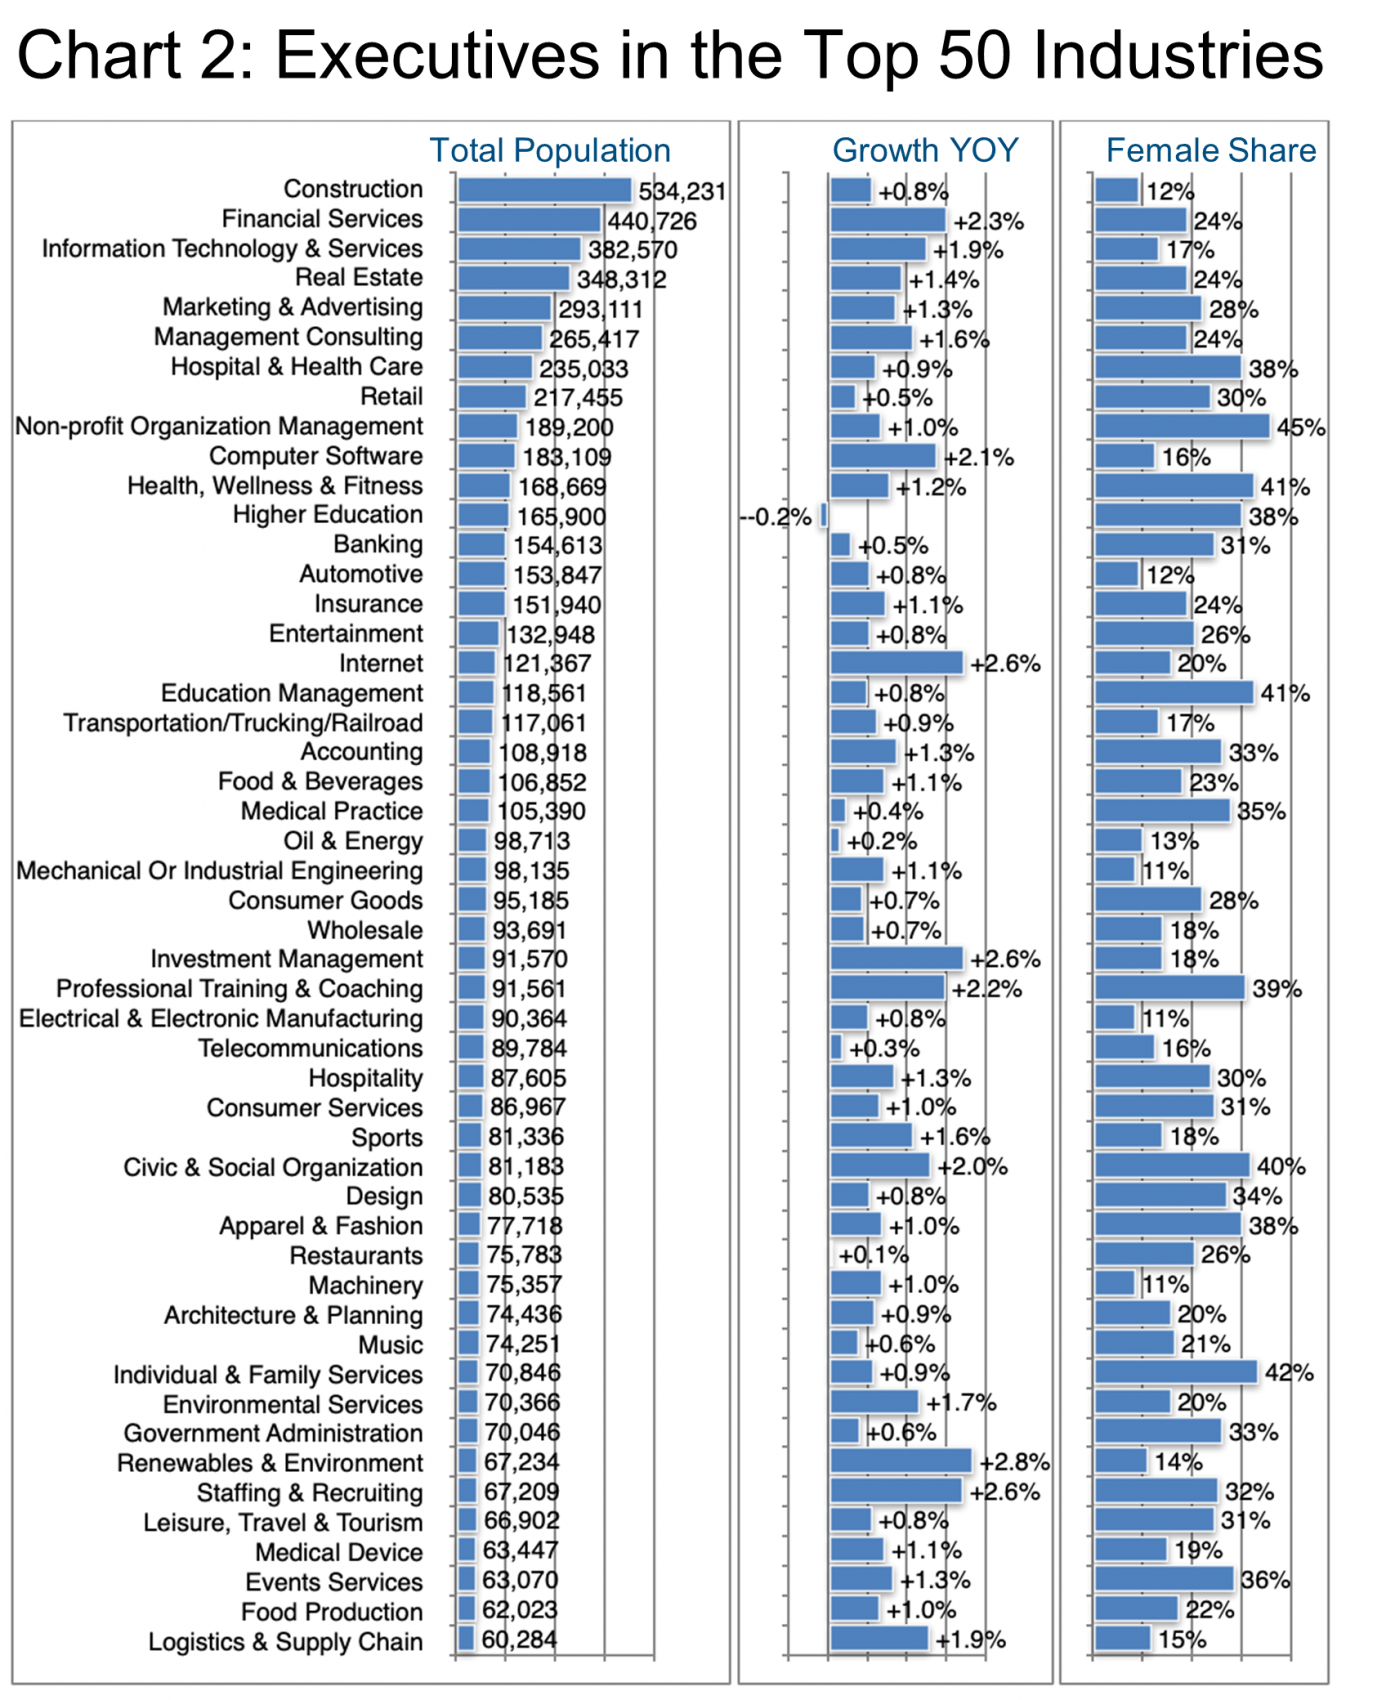 Chart 2_Executives in the Top 50 Industries.